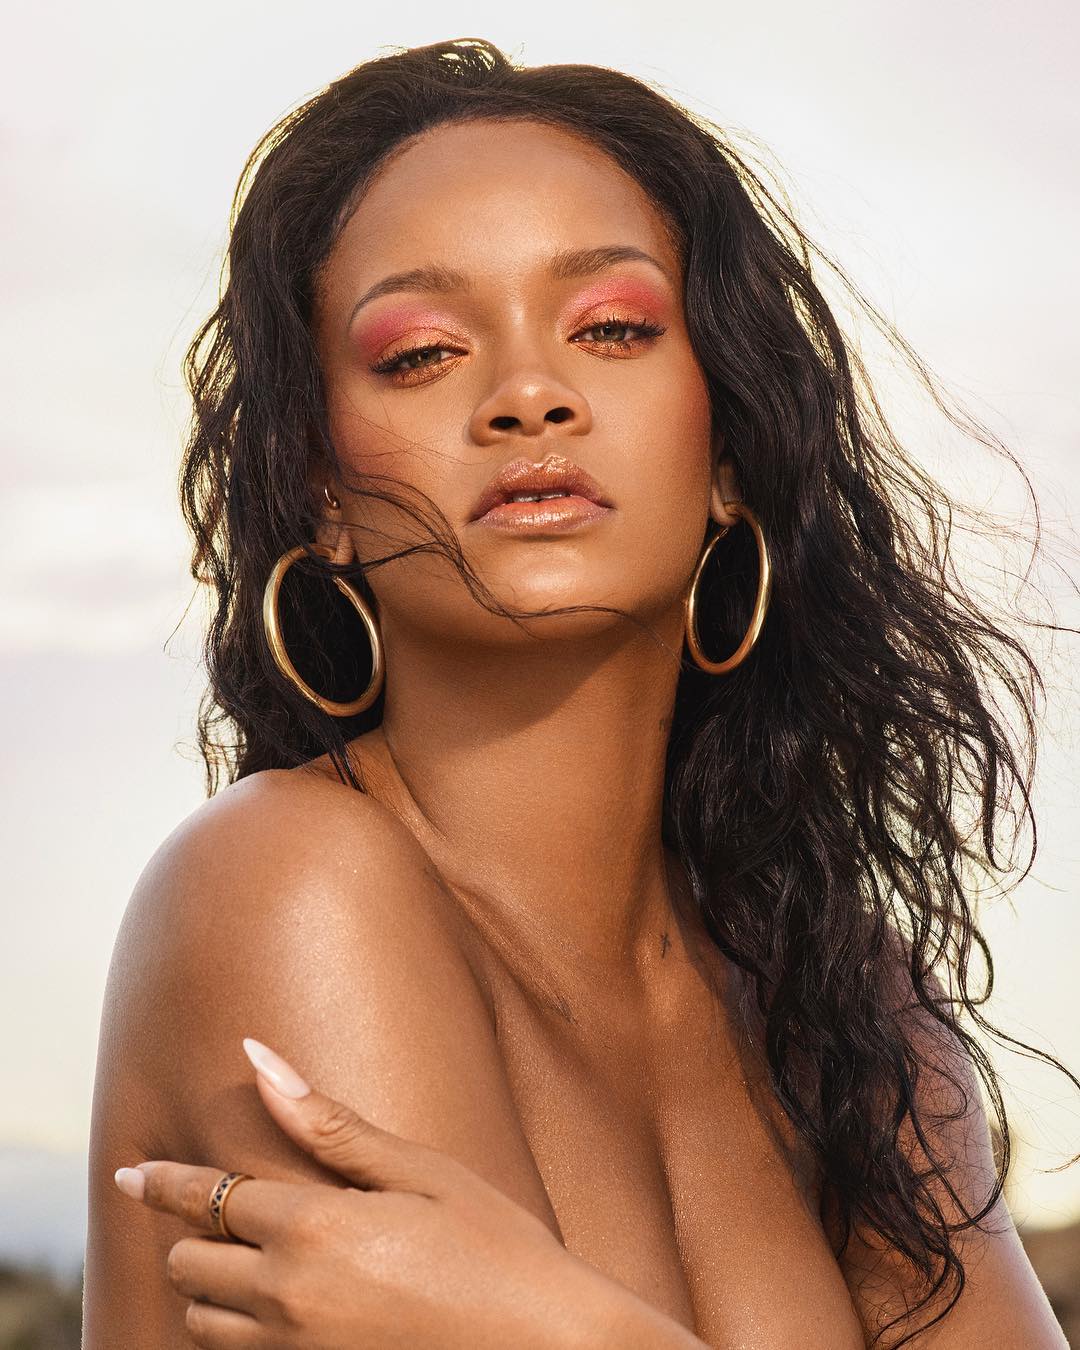 48 Hottest Rihanna Bikini Pictures Are The Sexiest Images You Will See On The Internet | Best Of Comic Books